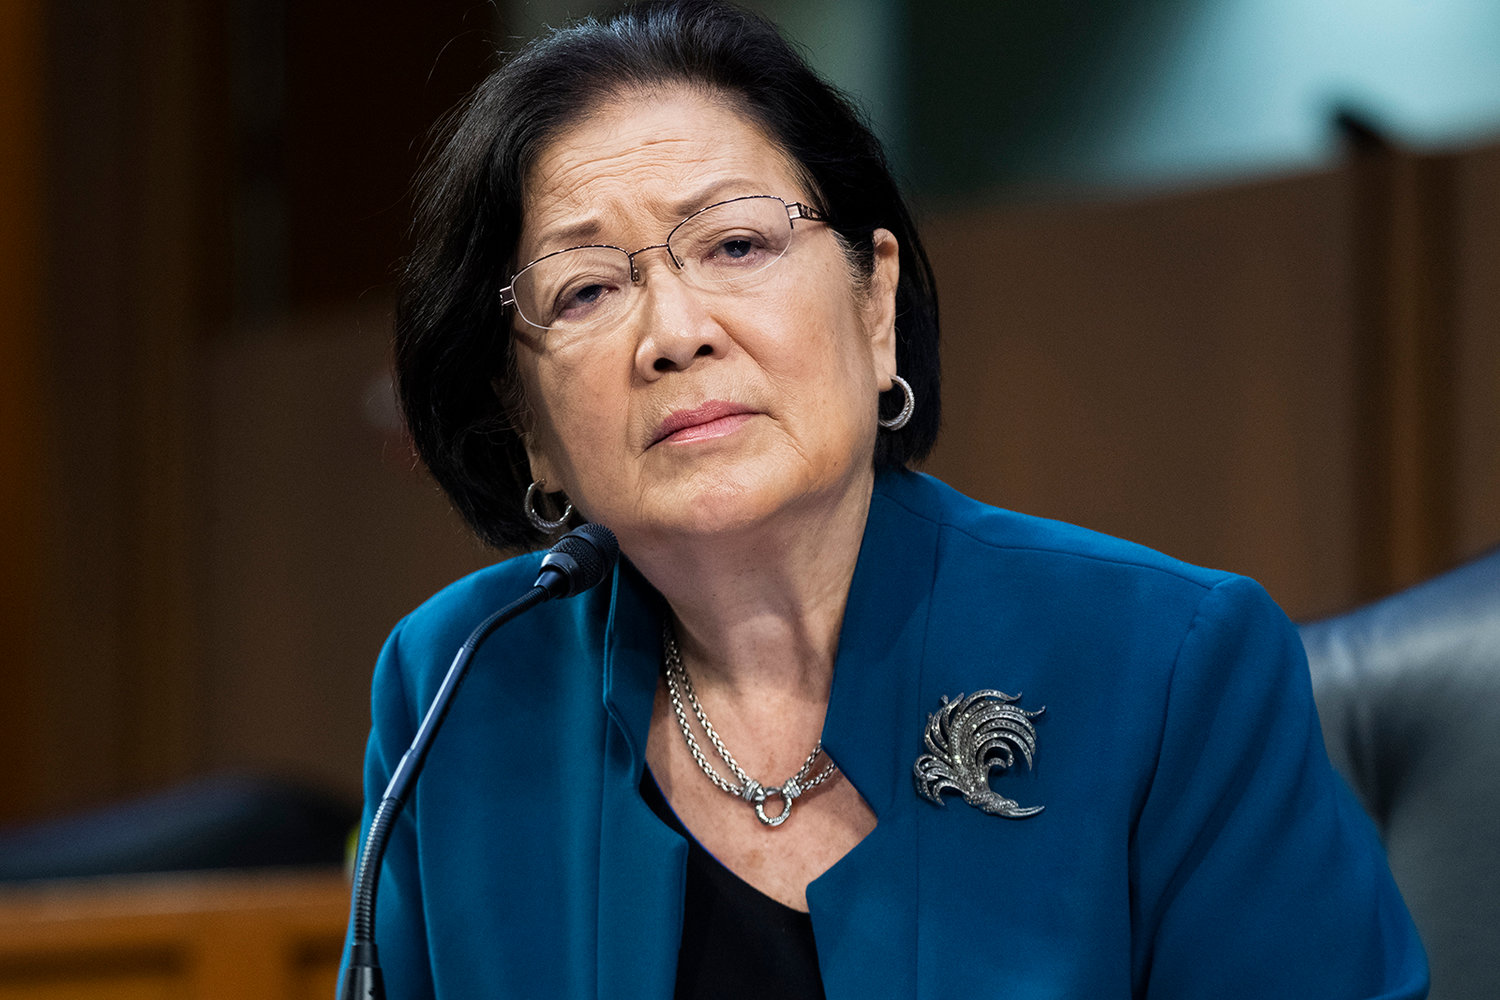 Sen. Mazie Hirono, (D-HI) attends a Senate Judiciary Committee hearing to examine Texas's abortion law on Capitol Hill on Sept. 29, 2021 in Washington, DC. (Tom Williams-Pool/Getty Images/TNS)